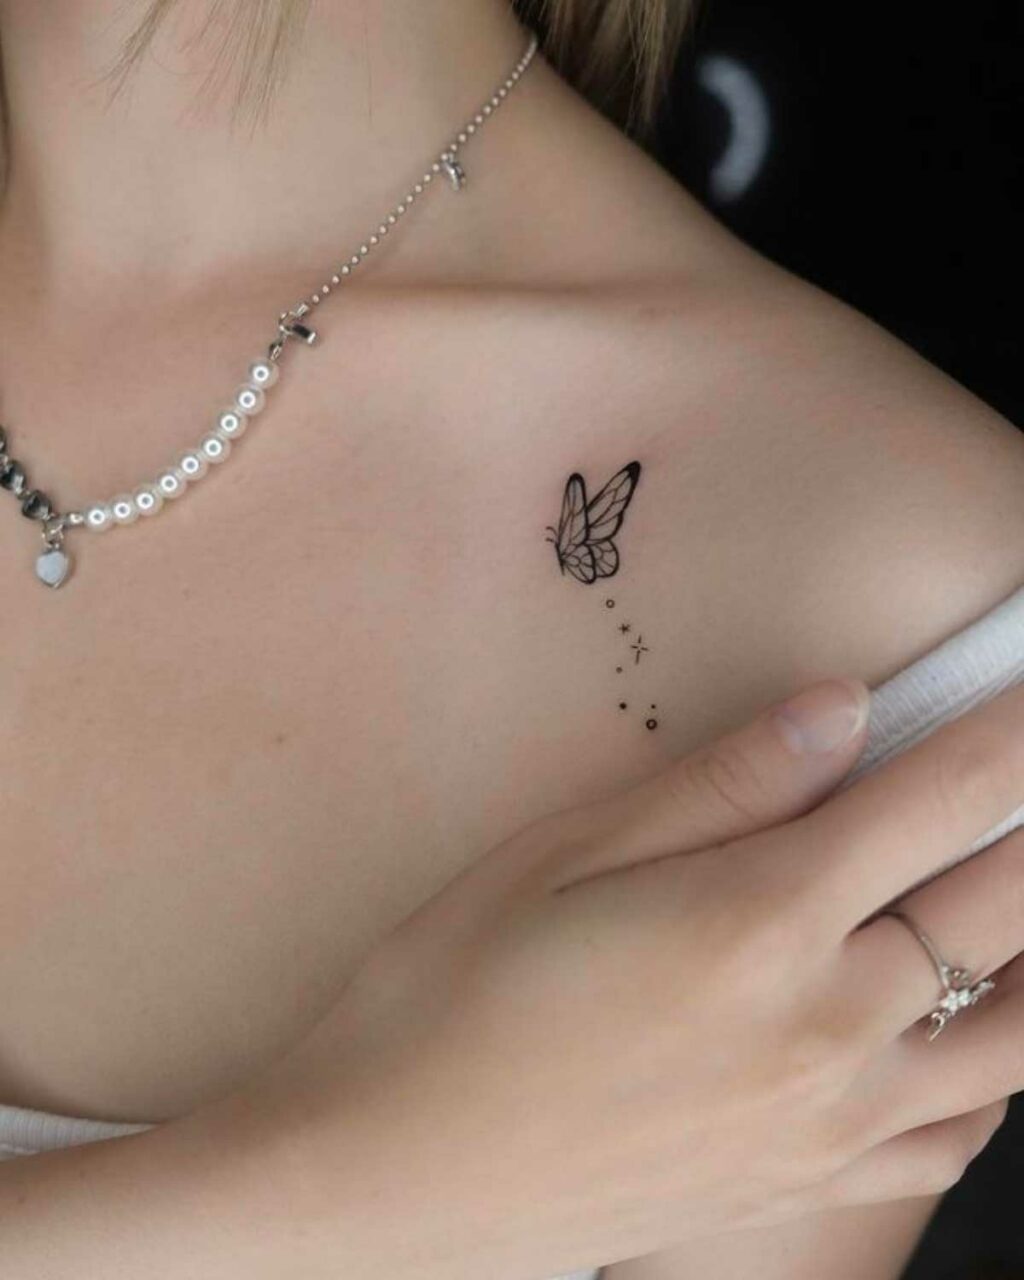 Small, black and white butterfly tattoo on a woman's shoulder, a delicate and meaningful design.